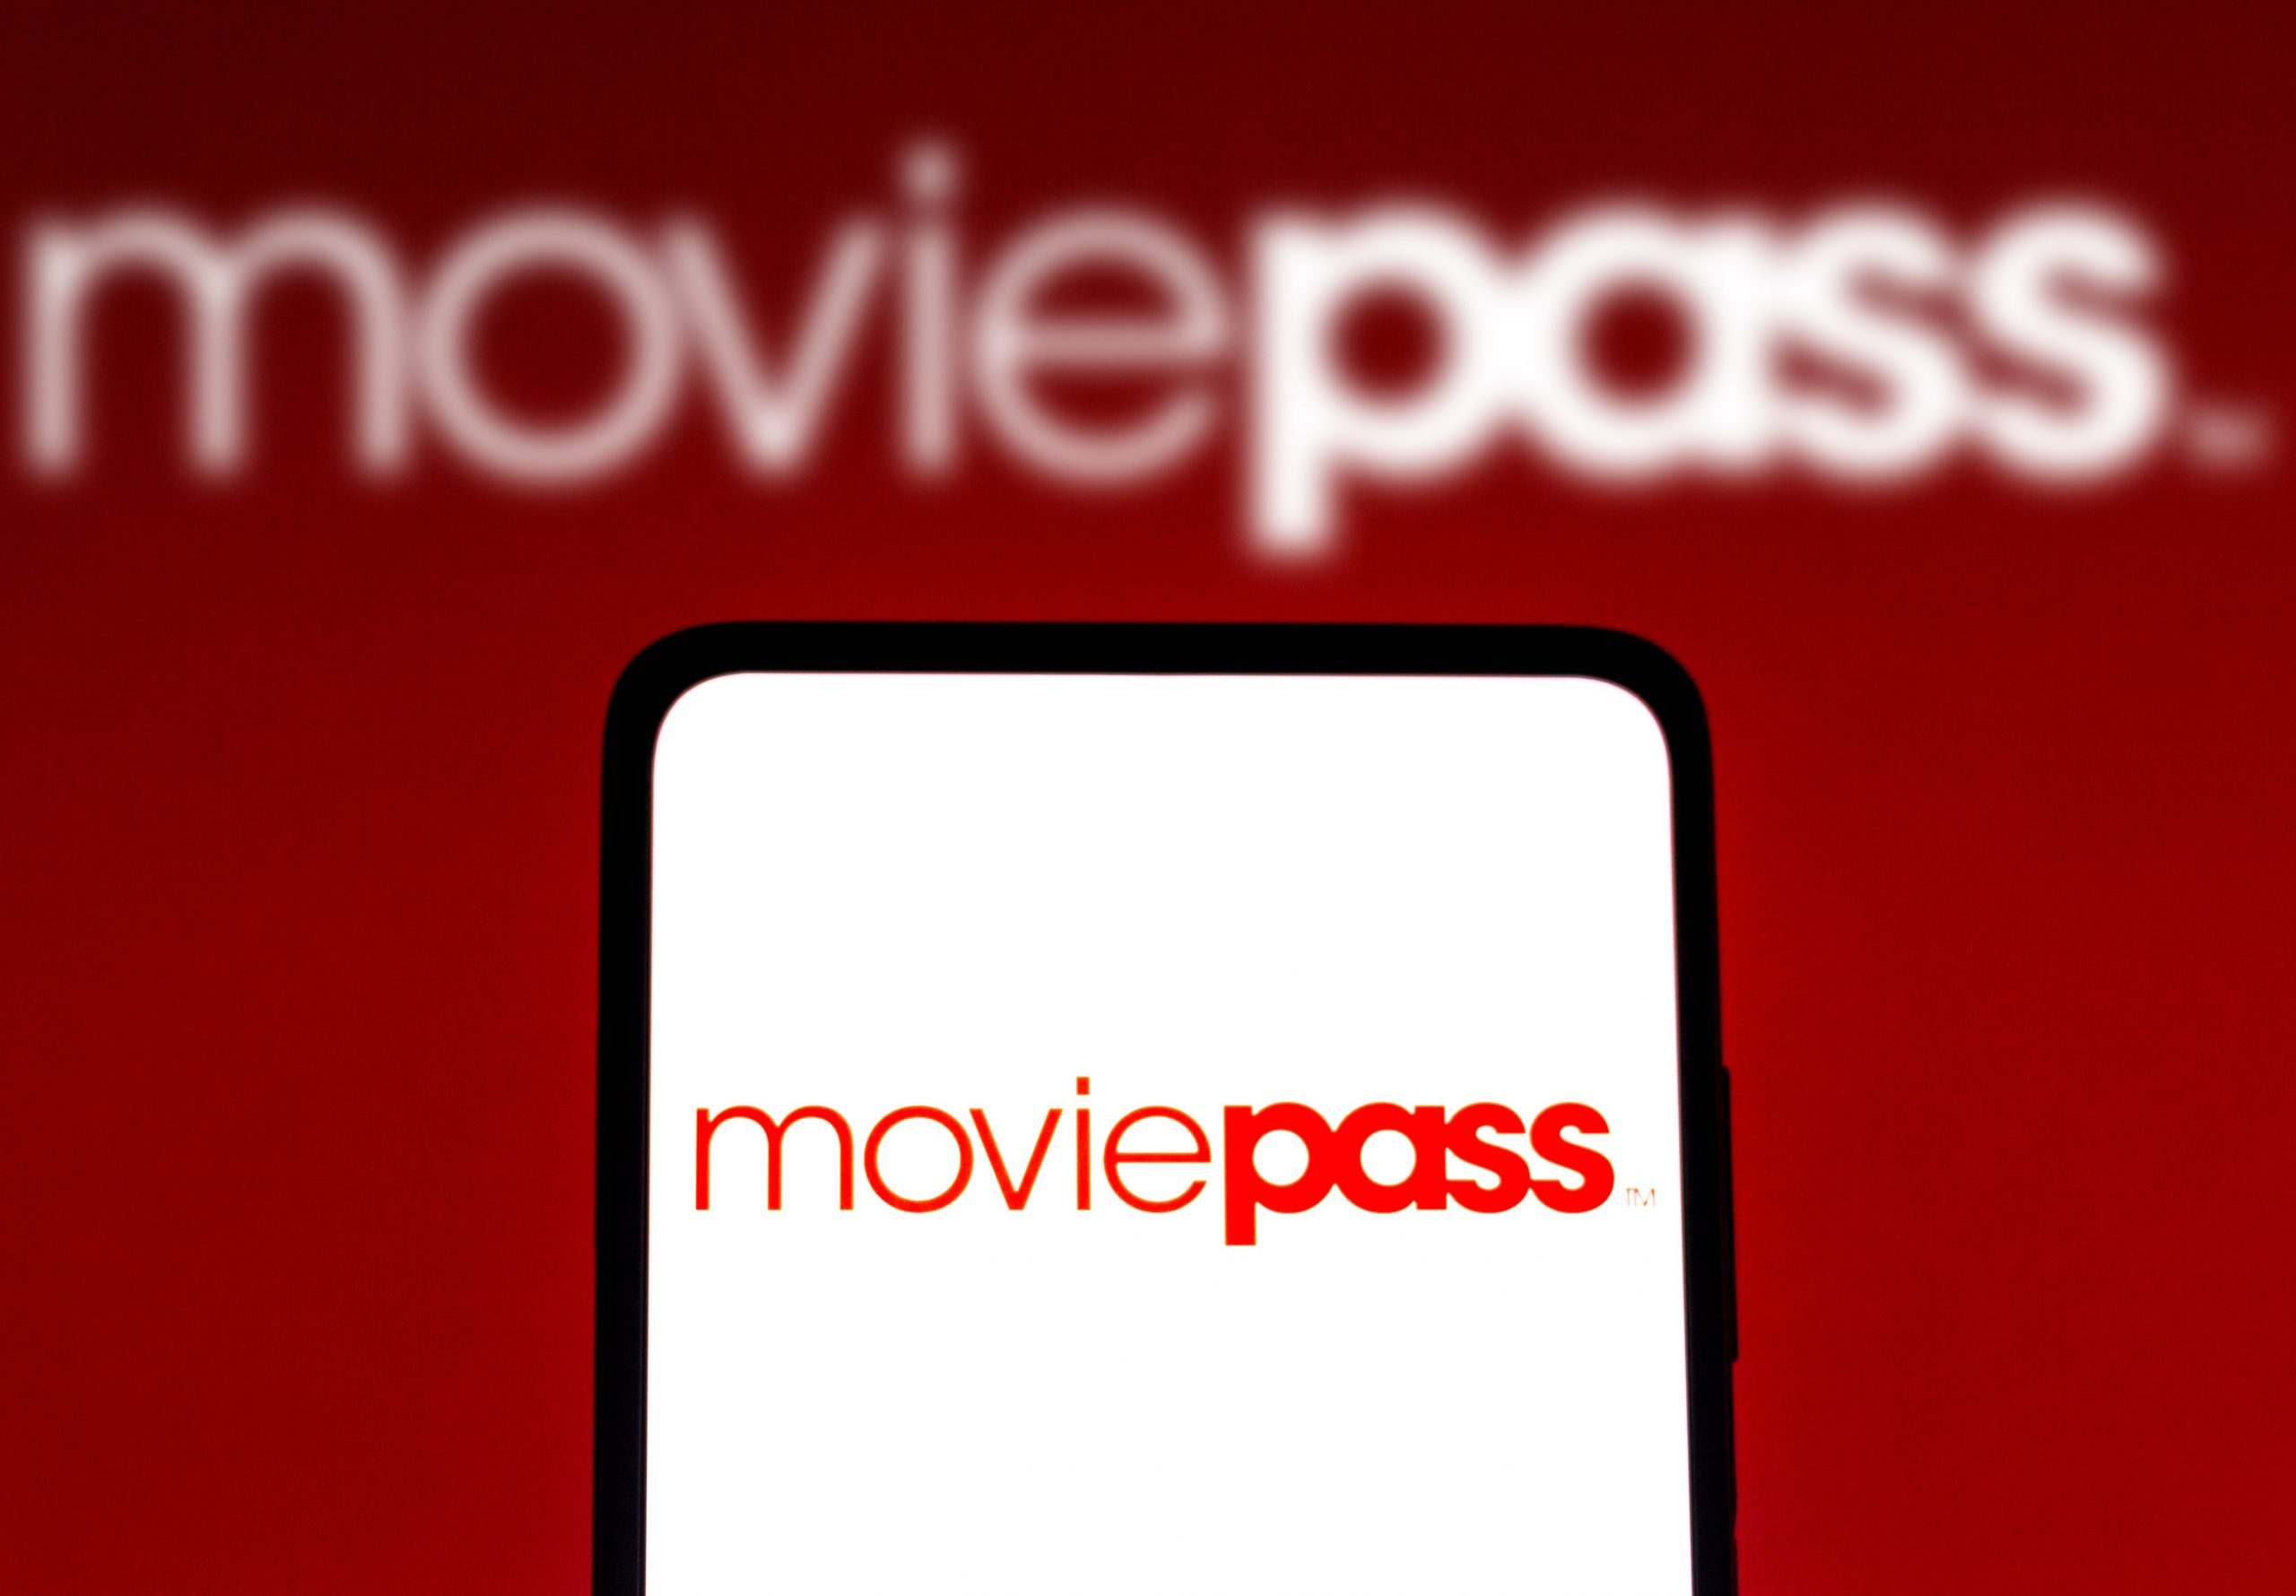 Former MoviePass executives indicted for fraud, “attempted scam”